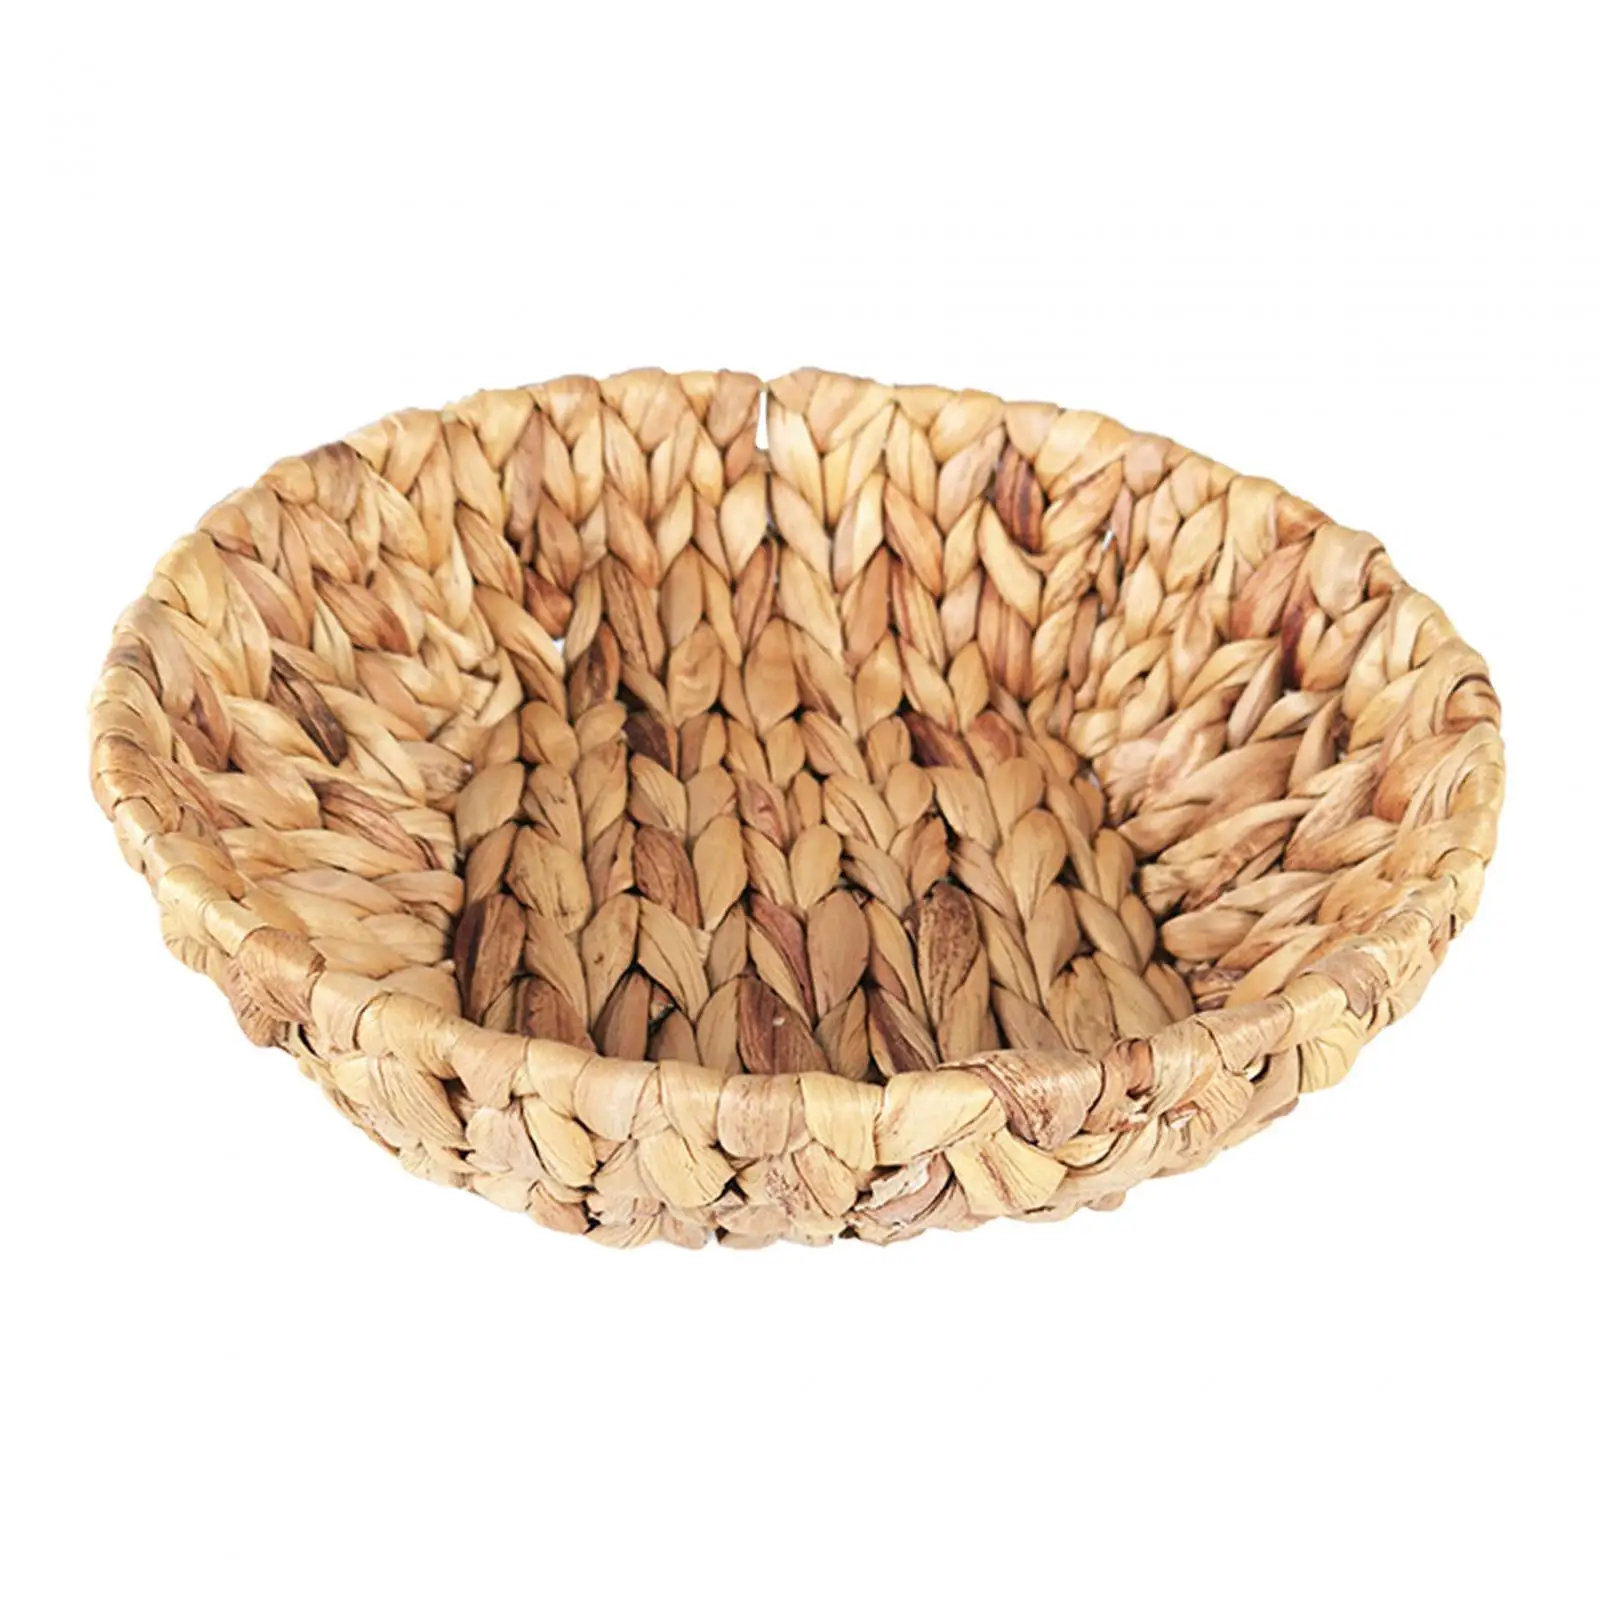 Round Grass Storage Bin Home Decorative Grass Weaving Tray Wicker Serving Tray for Bread Vegetable Tea Party